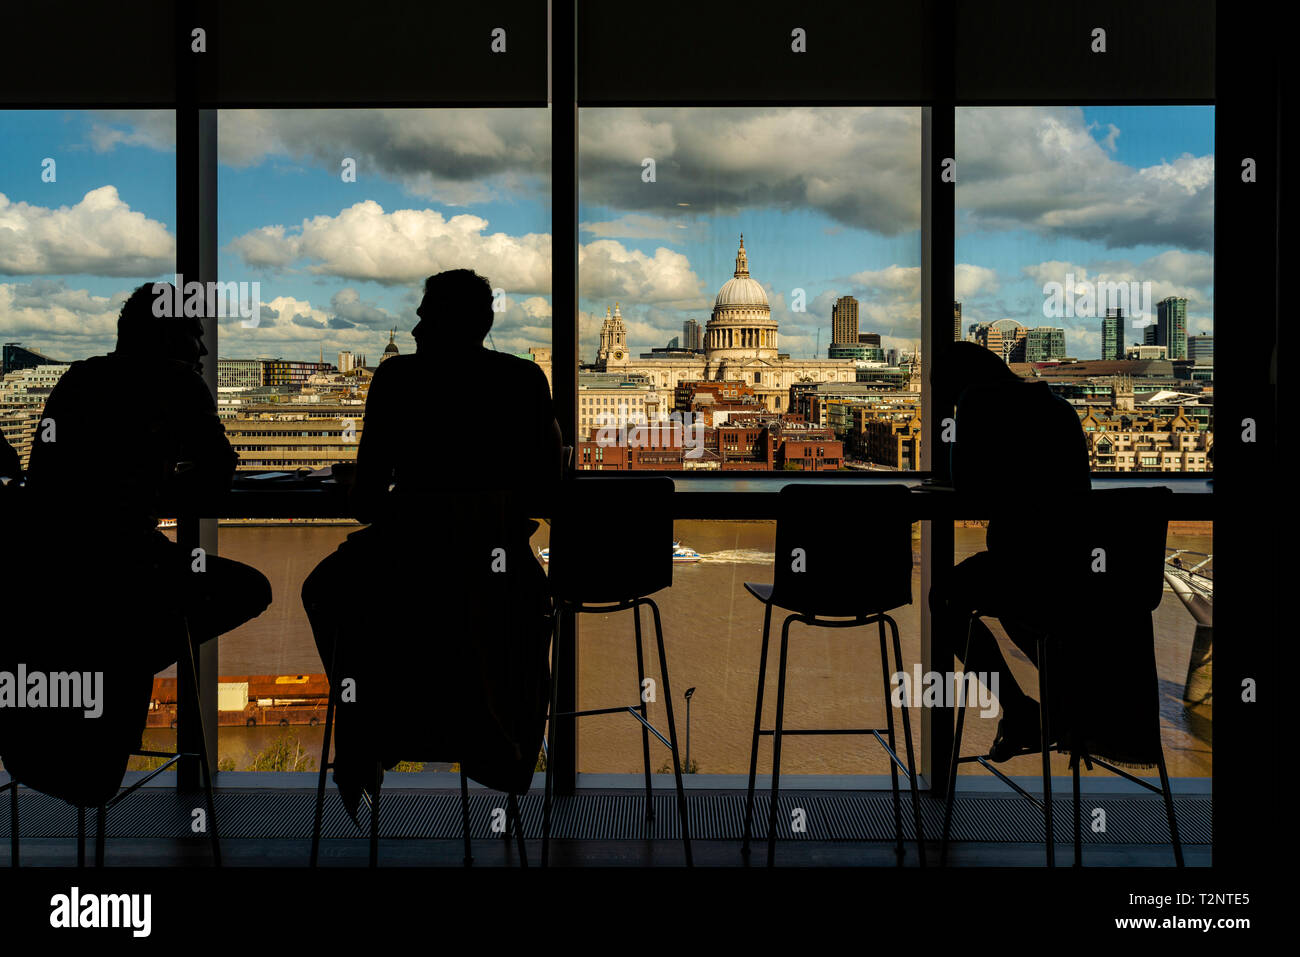 Silhouette of people having conversation by glass window, St Paul's Cathedral in background, City of London, UK Stock Photo